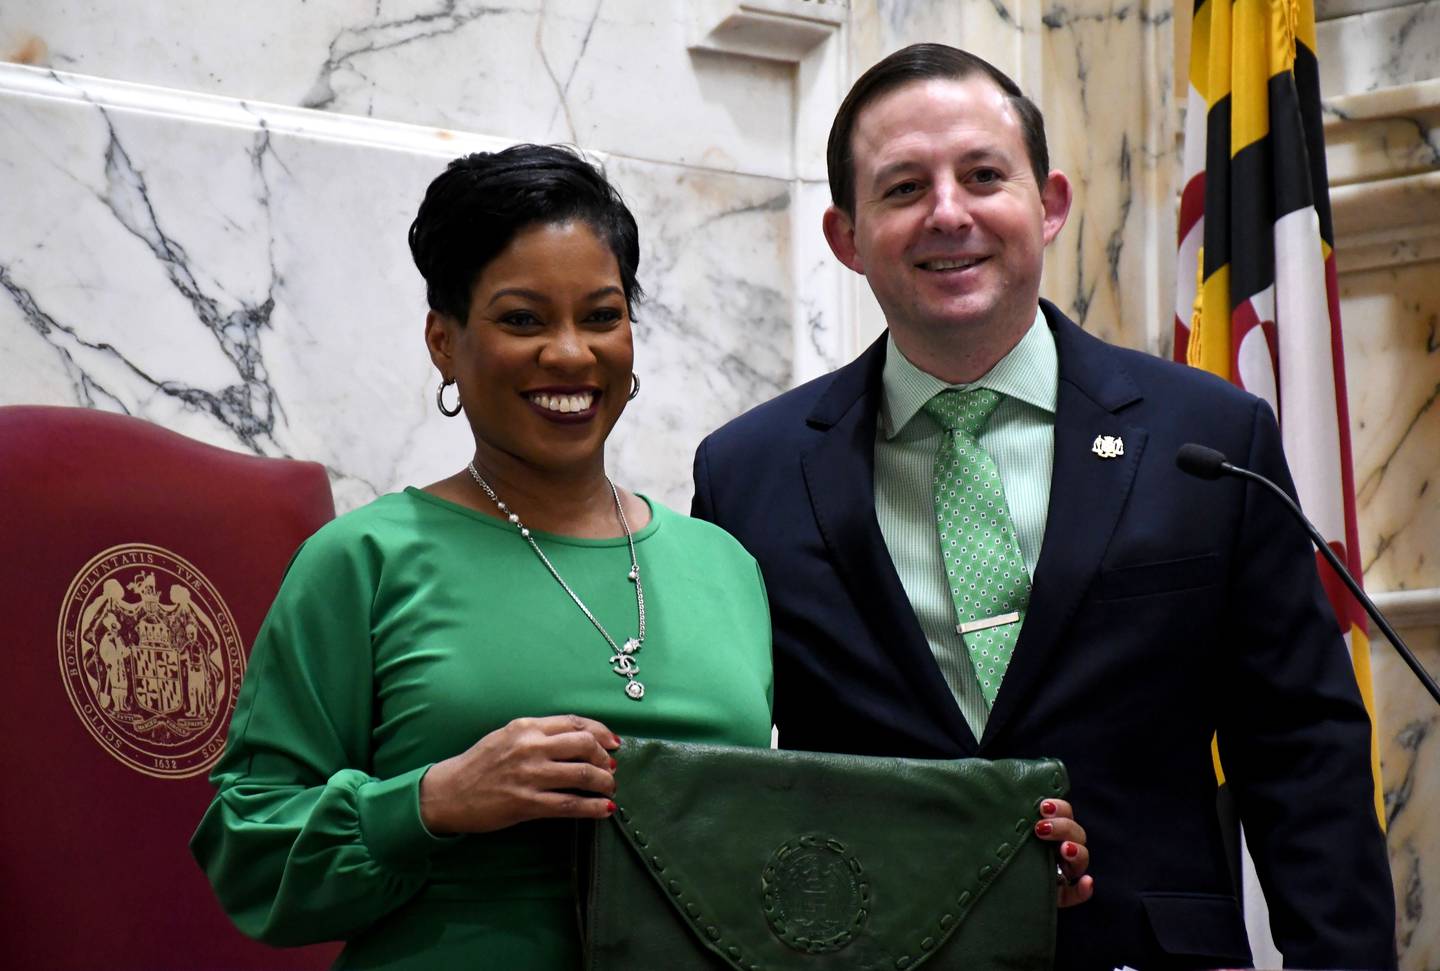 A woman wearing a green dress smiles and holds a green leather bag. Next to her is a man in a dark suit with a green shirt and tie. A Maryland flag and marbled wall is behind them.